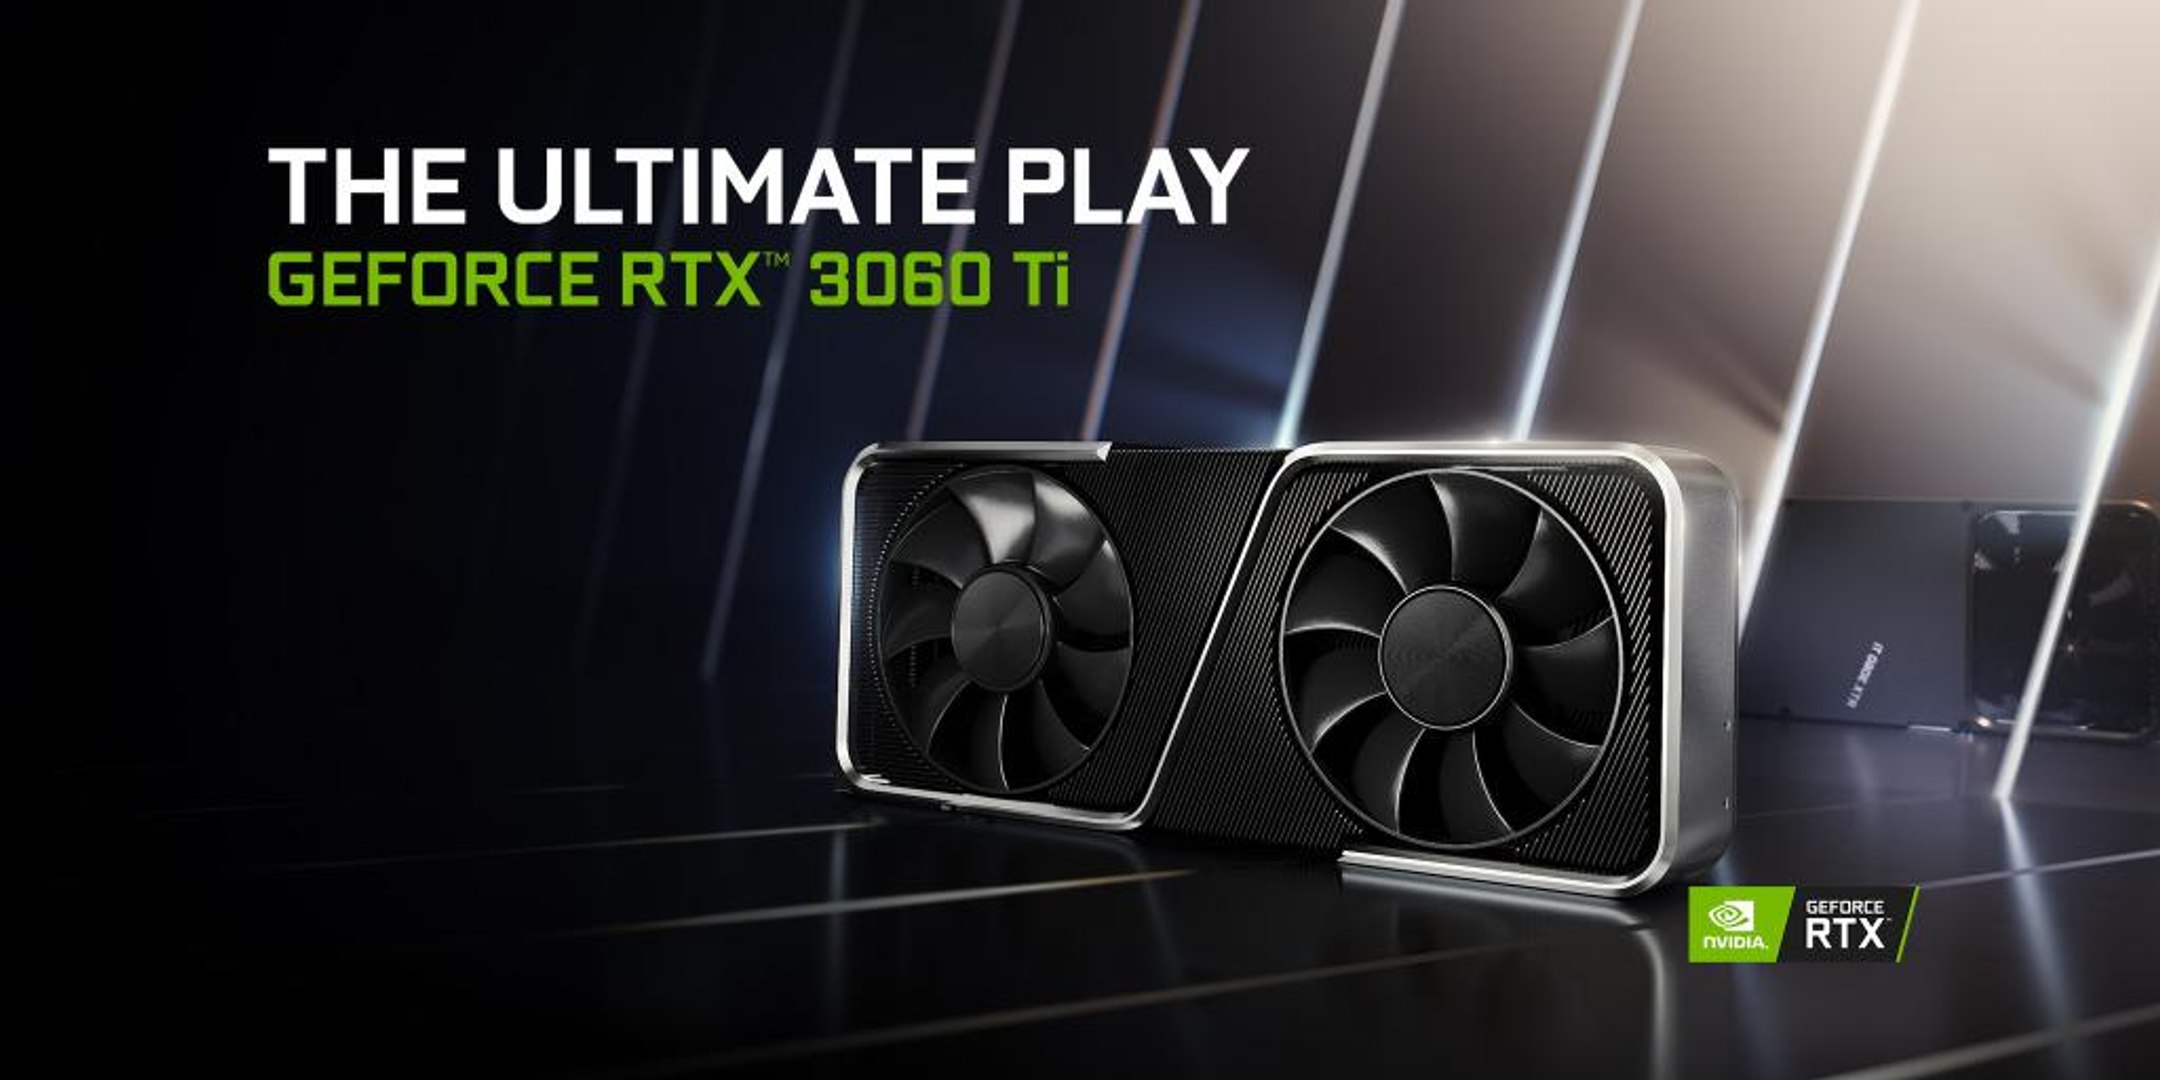 Introducing the GeForce RTX 3060 Ti The Ultimate Play - Vídeo Dailymotion